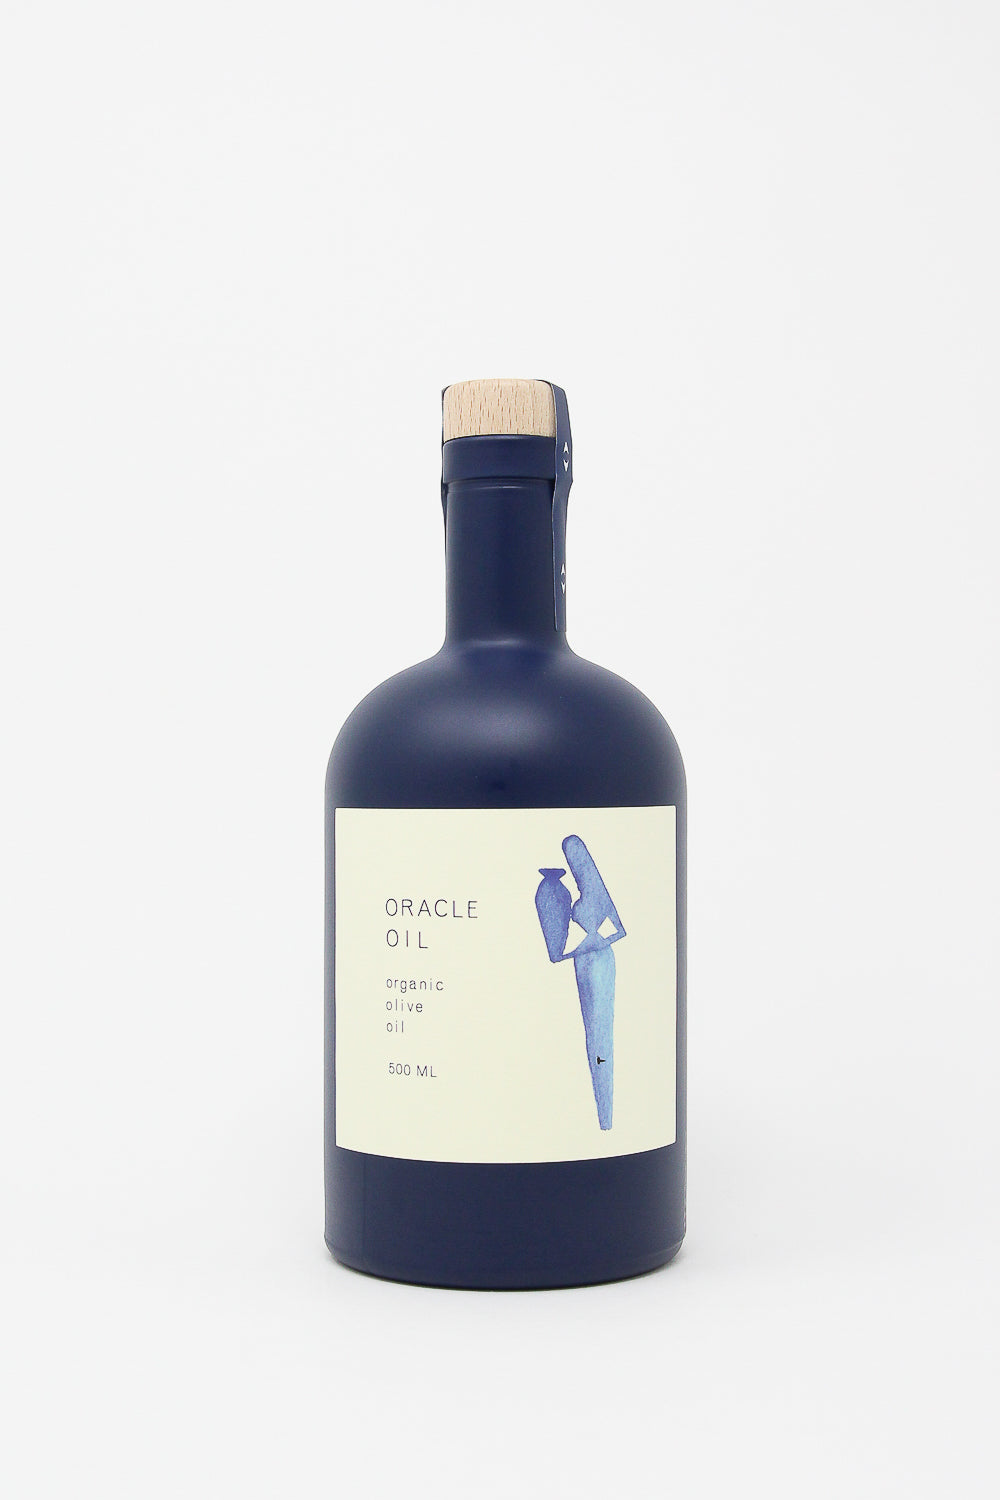 A bottle of organic Oracle Oil - Olive Oil 500mL with a blue label.